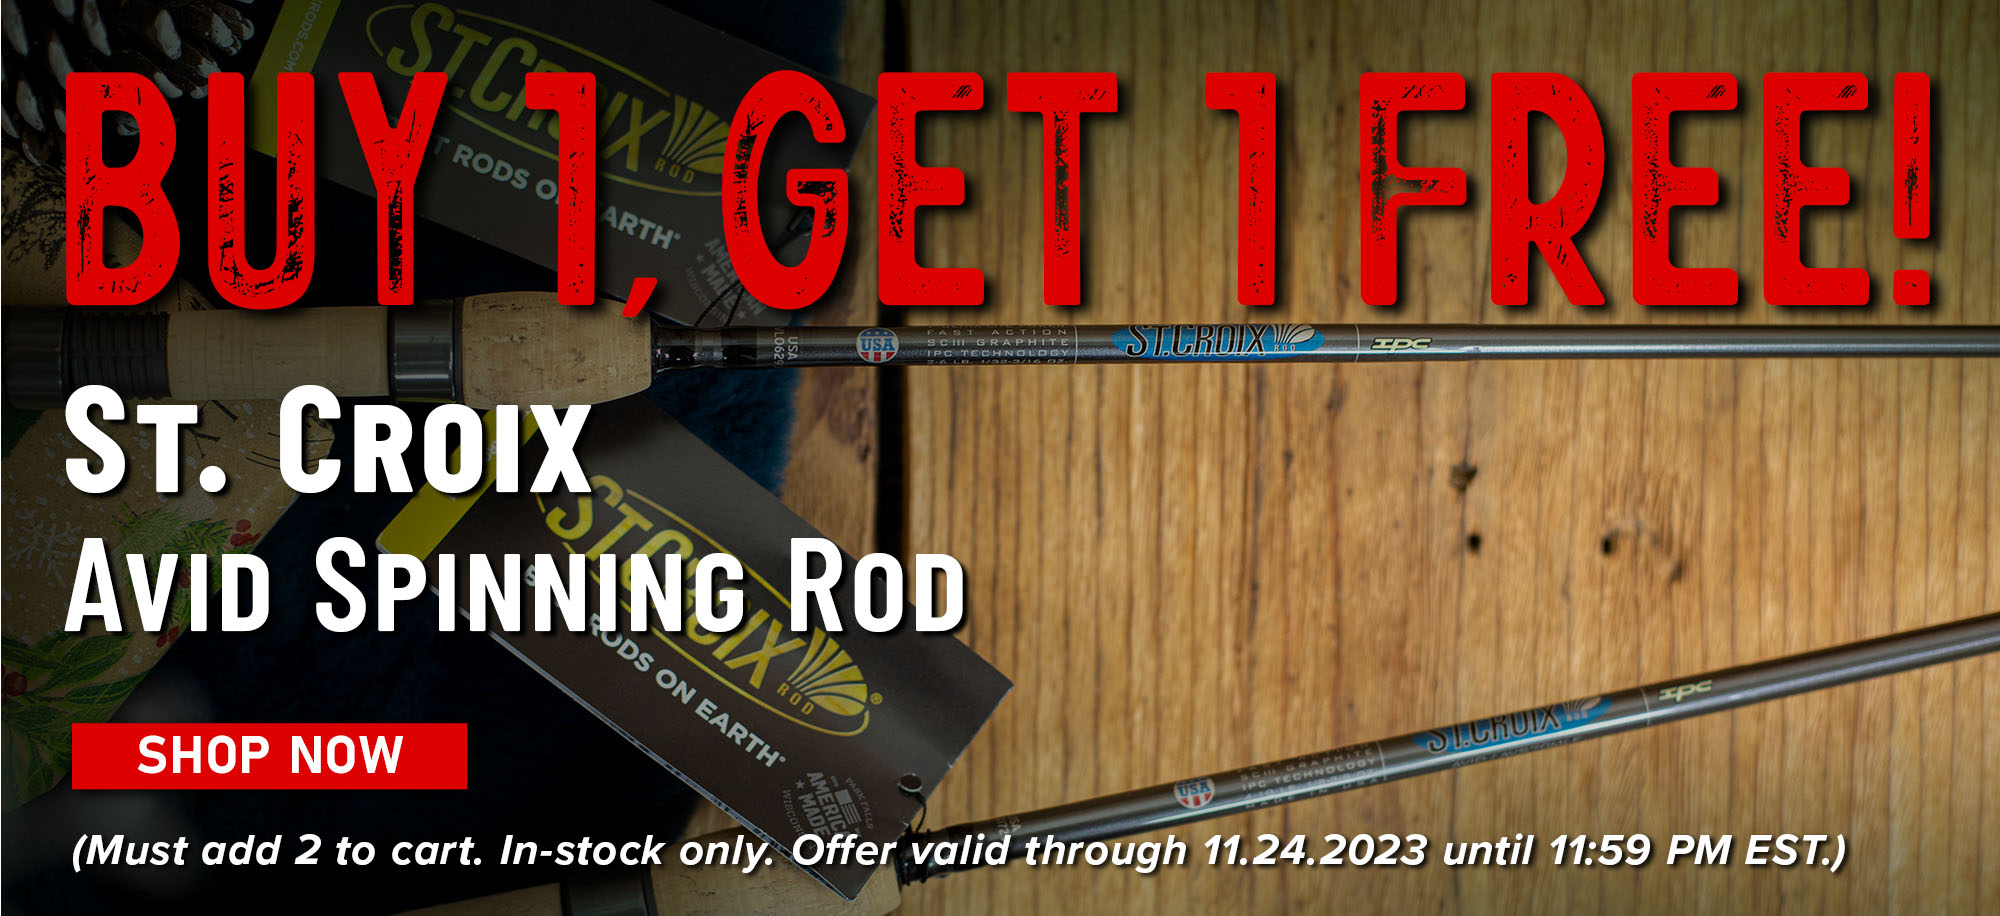 Buy 1, Get 1 Free! St. Croix Avid Spinning Rod Shop Now (Must add 2 to cart. In-stock only. Offer valid through 11.24.2023 until 11:59 PM EST.)